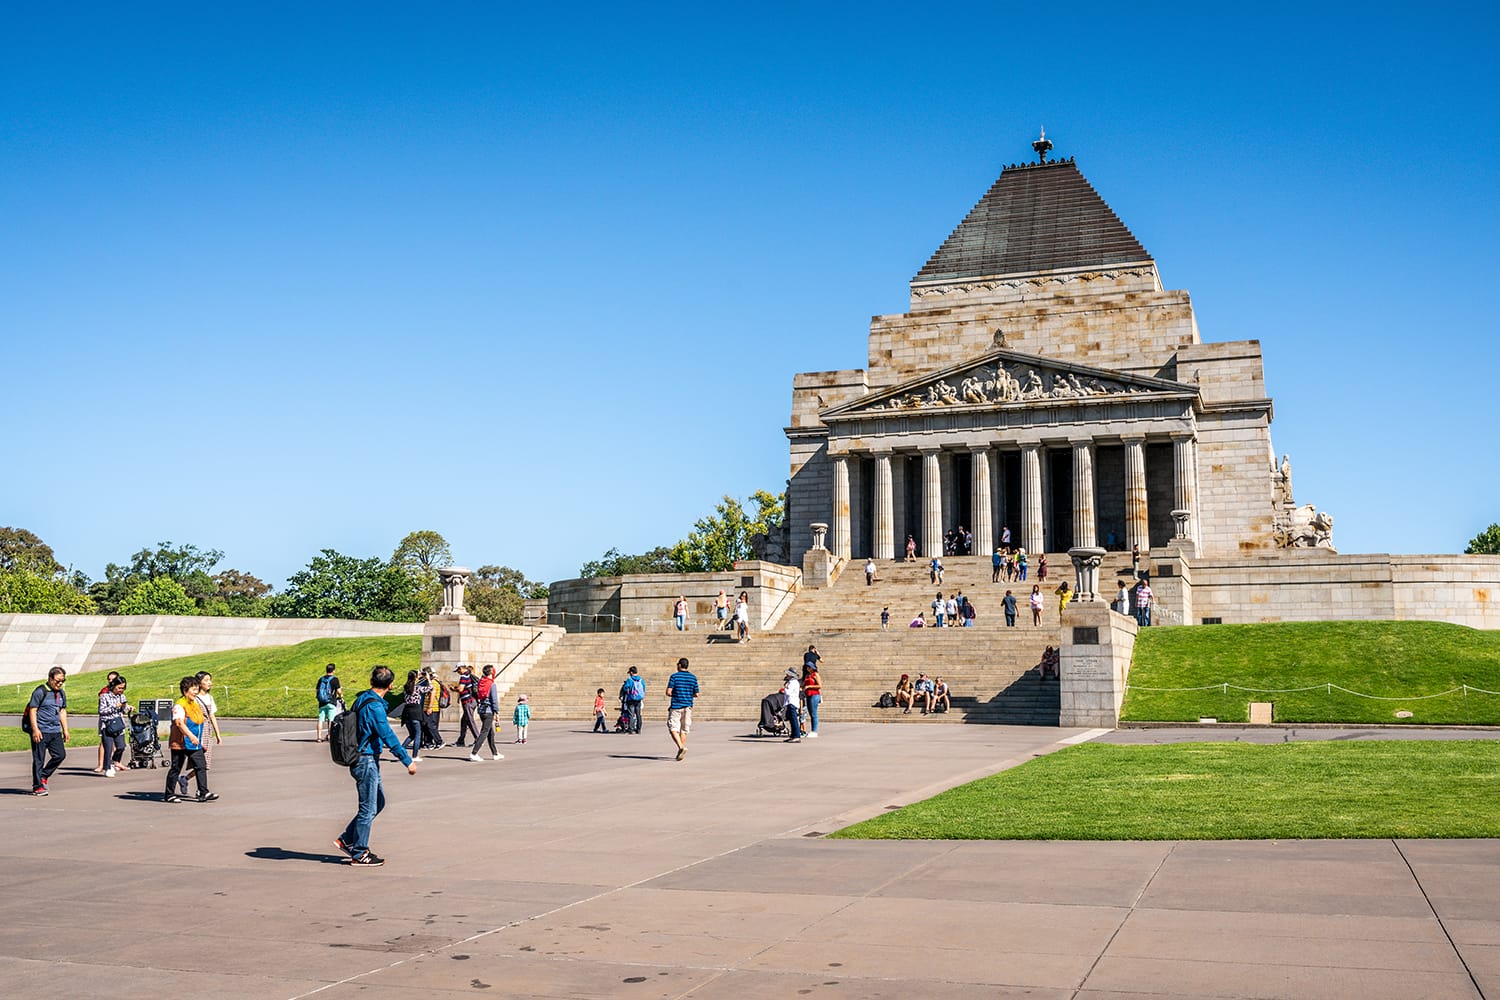 View of the Shrine of Remembrance with people and tourists in Melbourne Victoria Australia